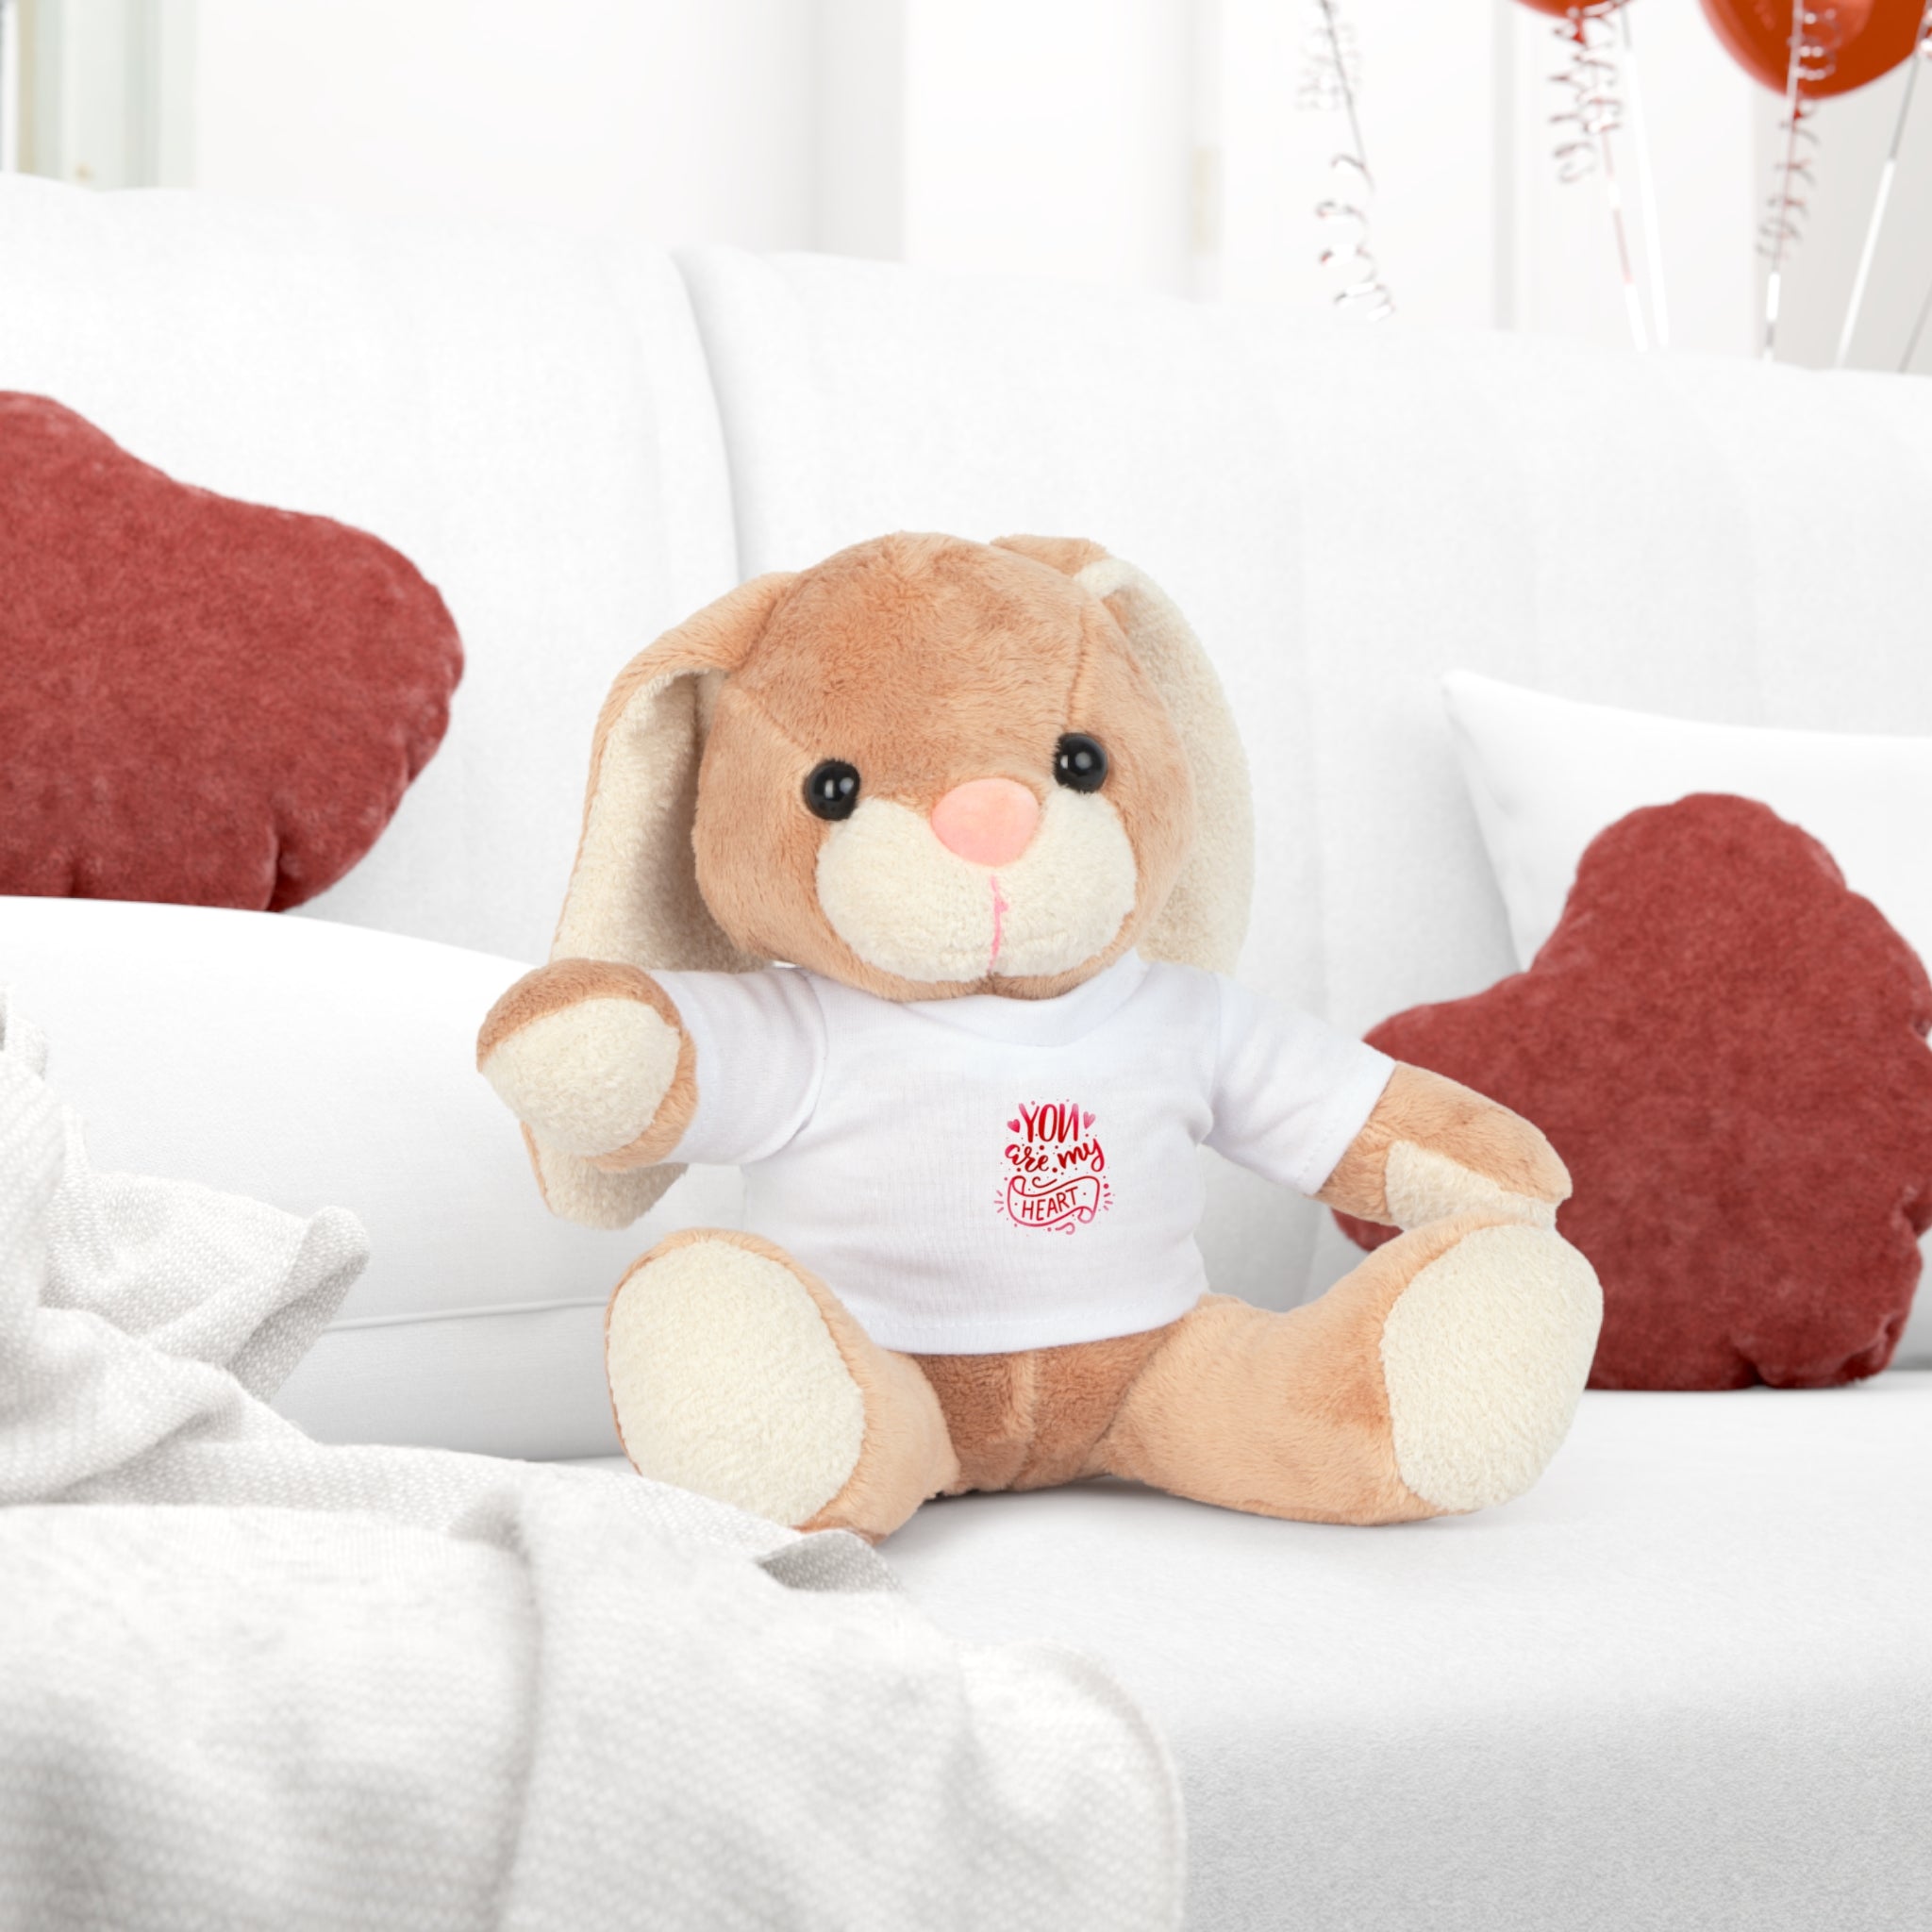 My Heart Plush Toy with T-Shirt